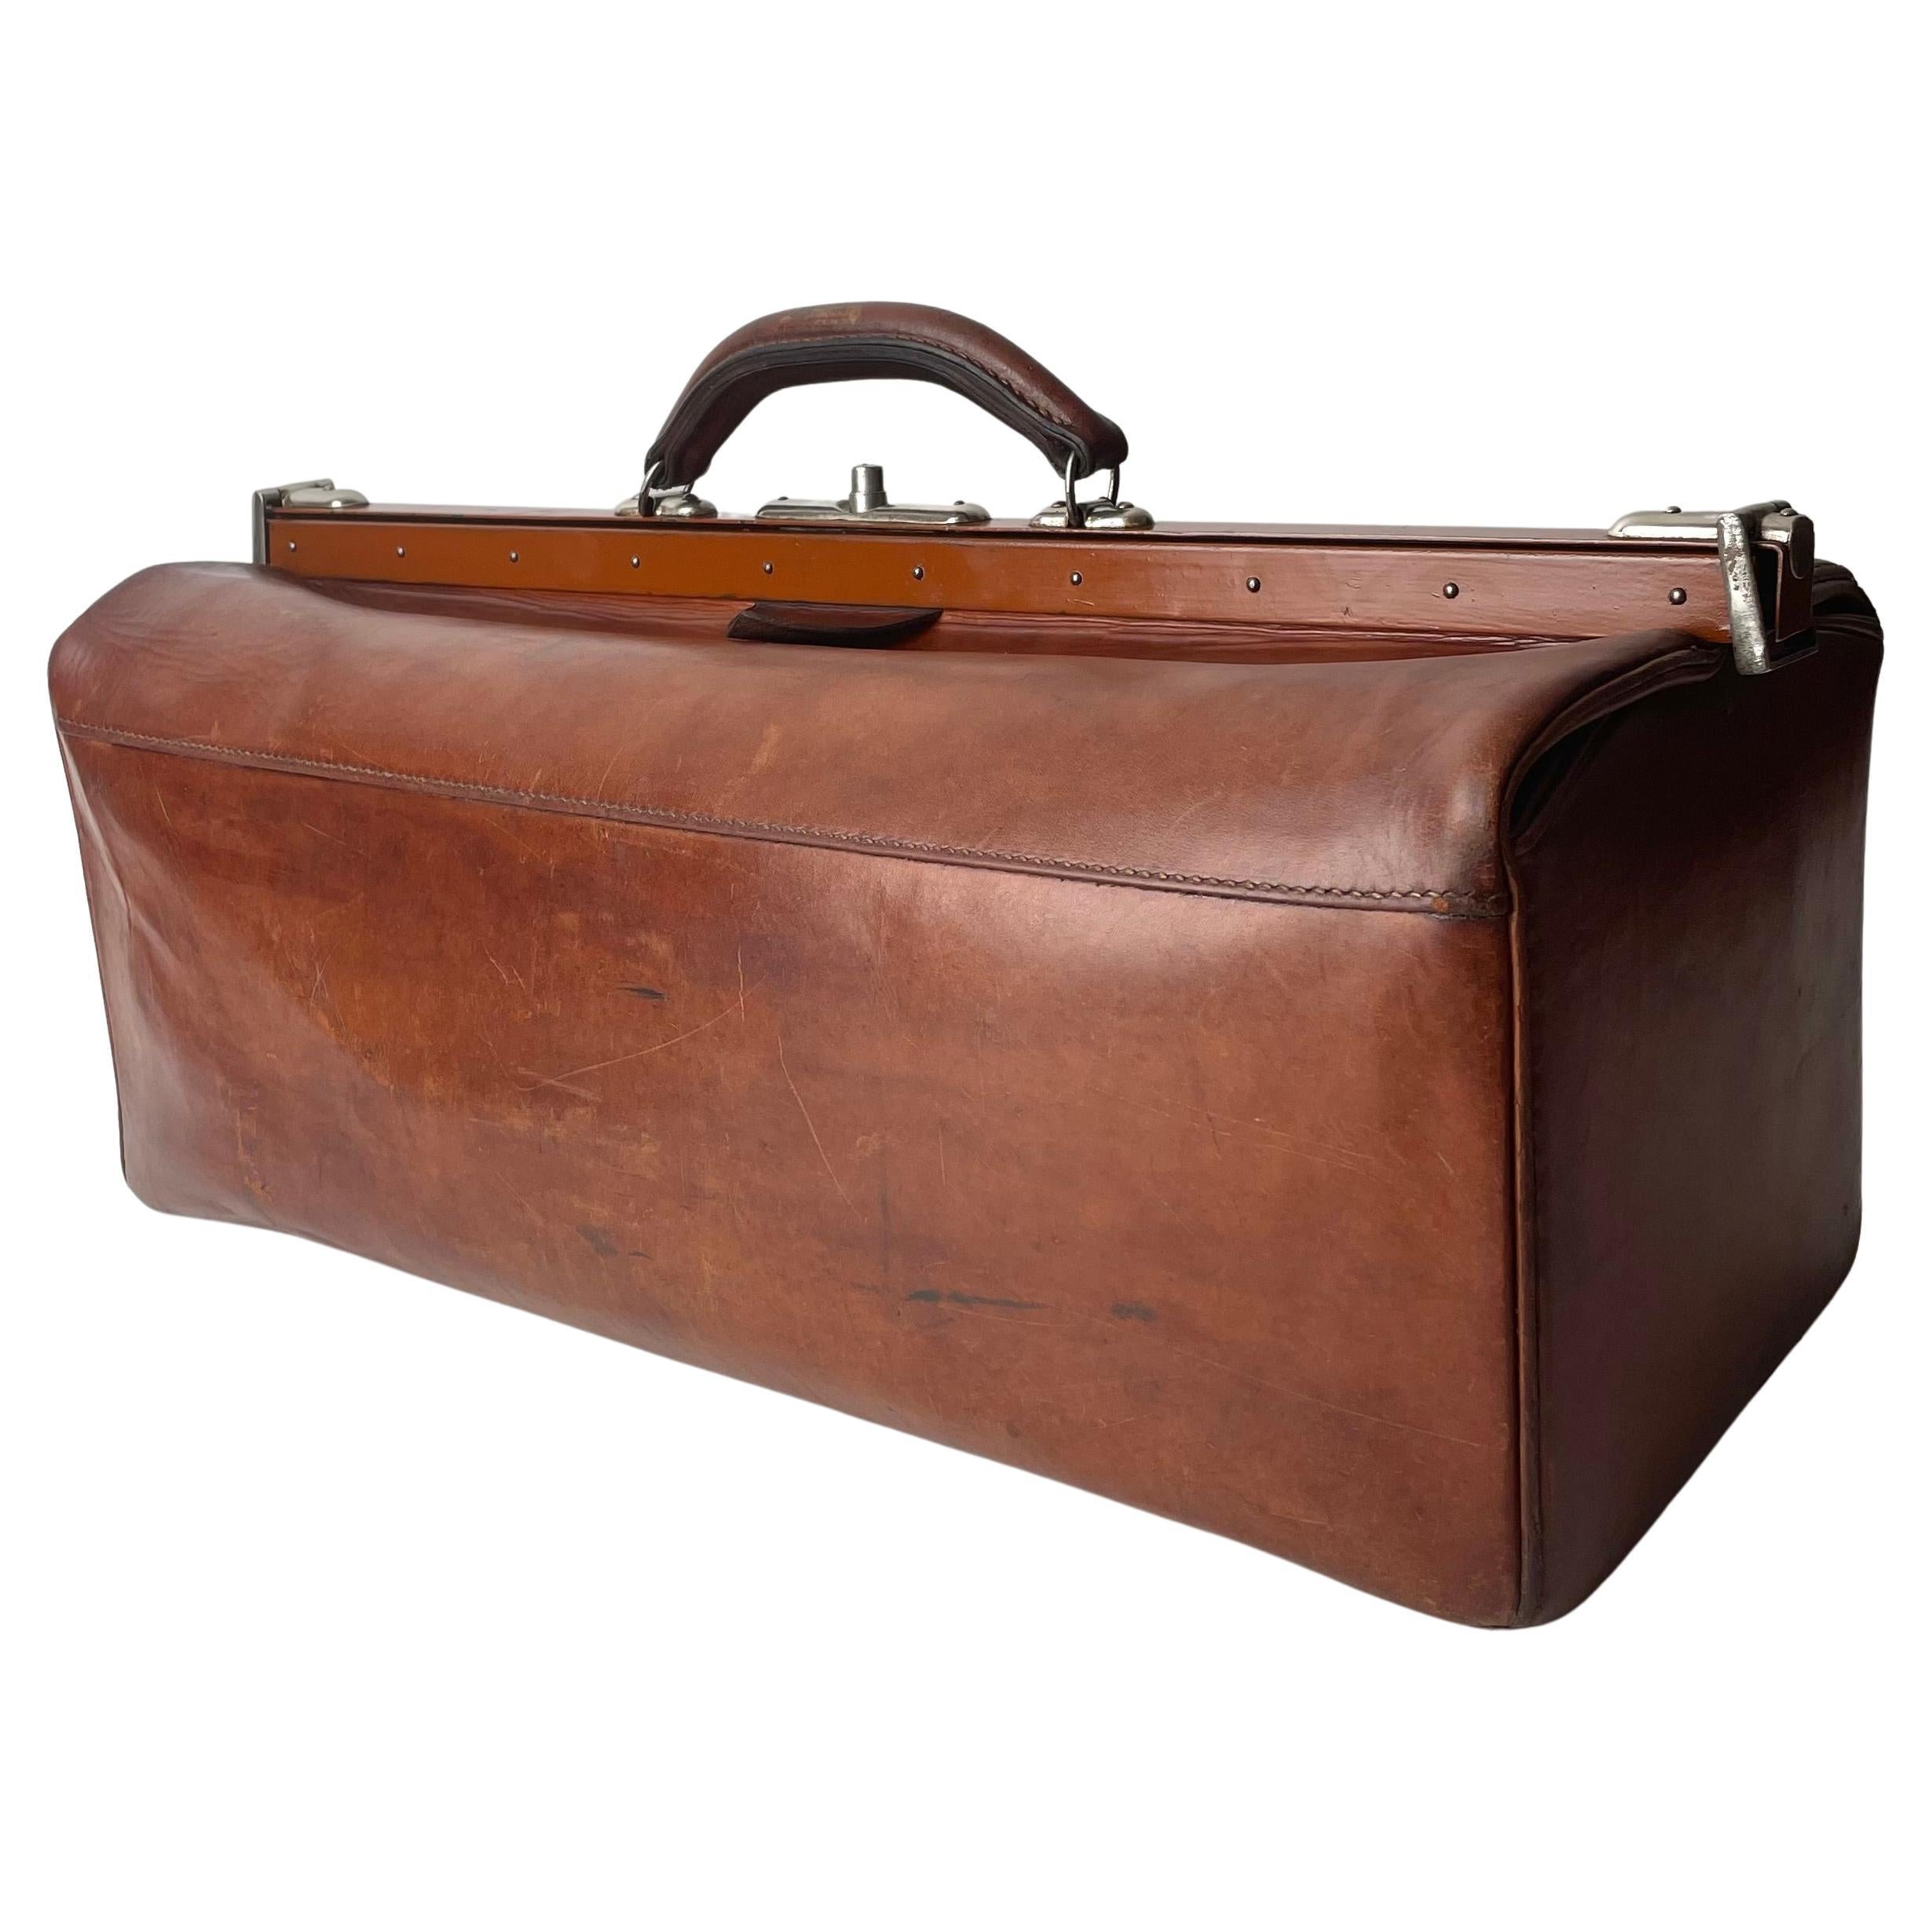 Early 19th Century Leather Luggage with Nickel Details For Sale